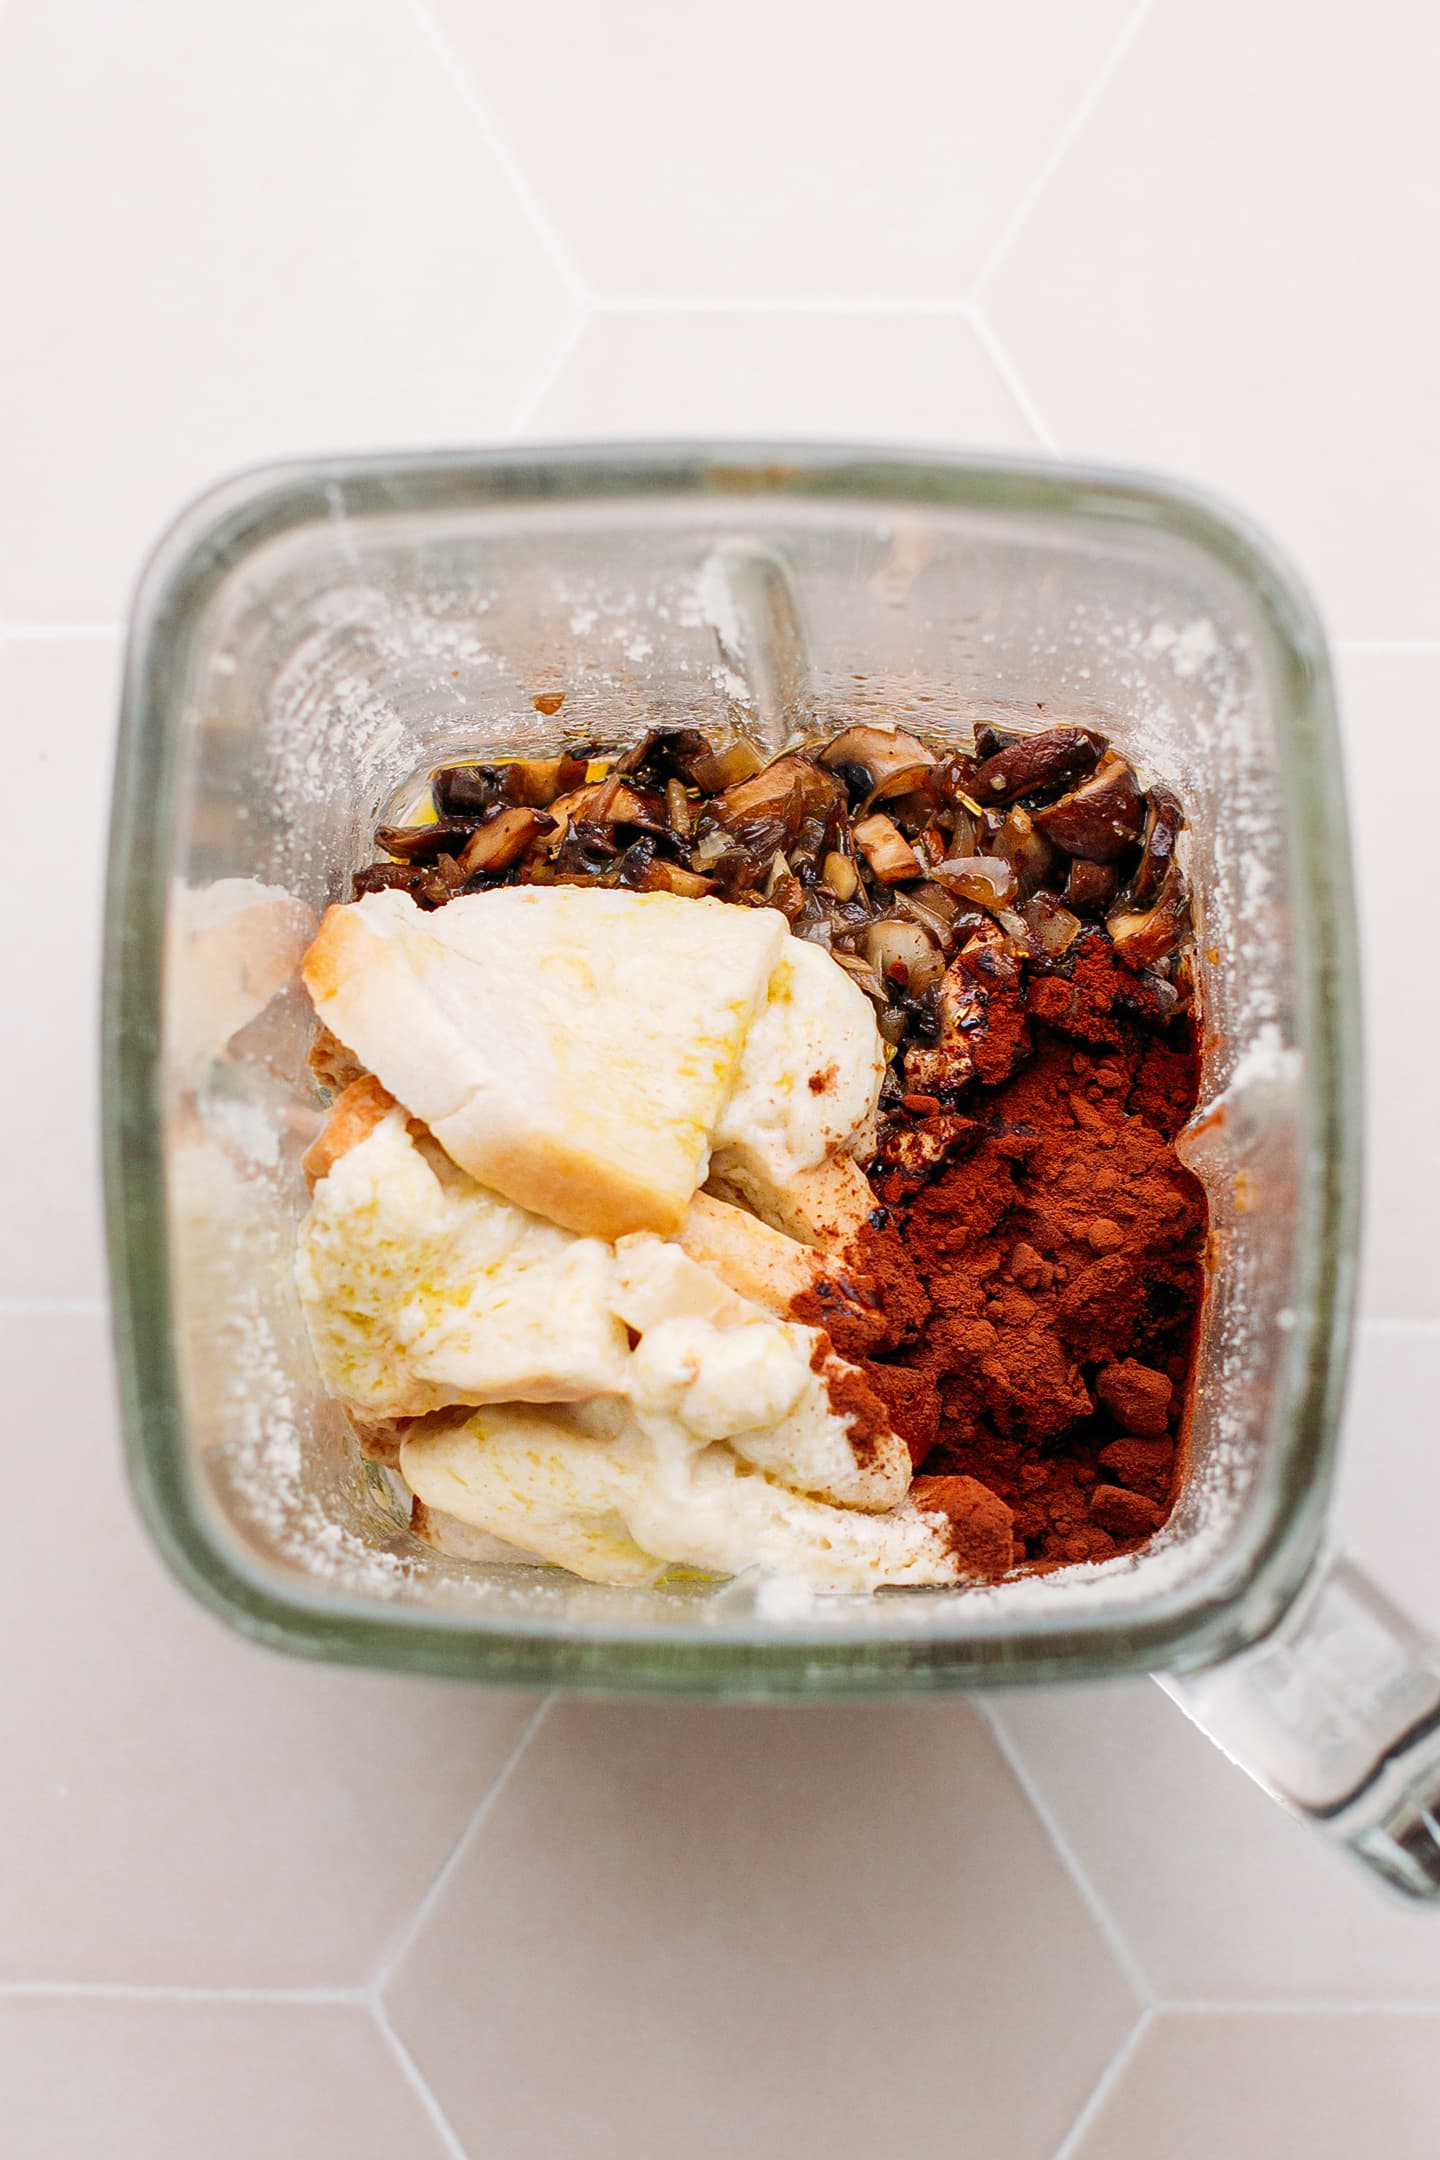 Mushrooms, bread, and cacao powder in a blender.